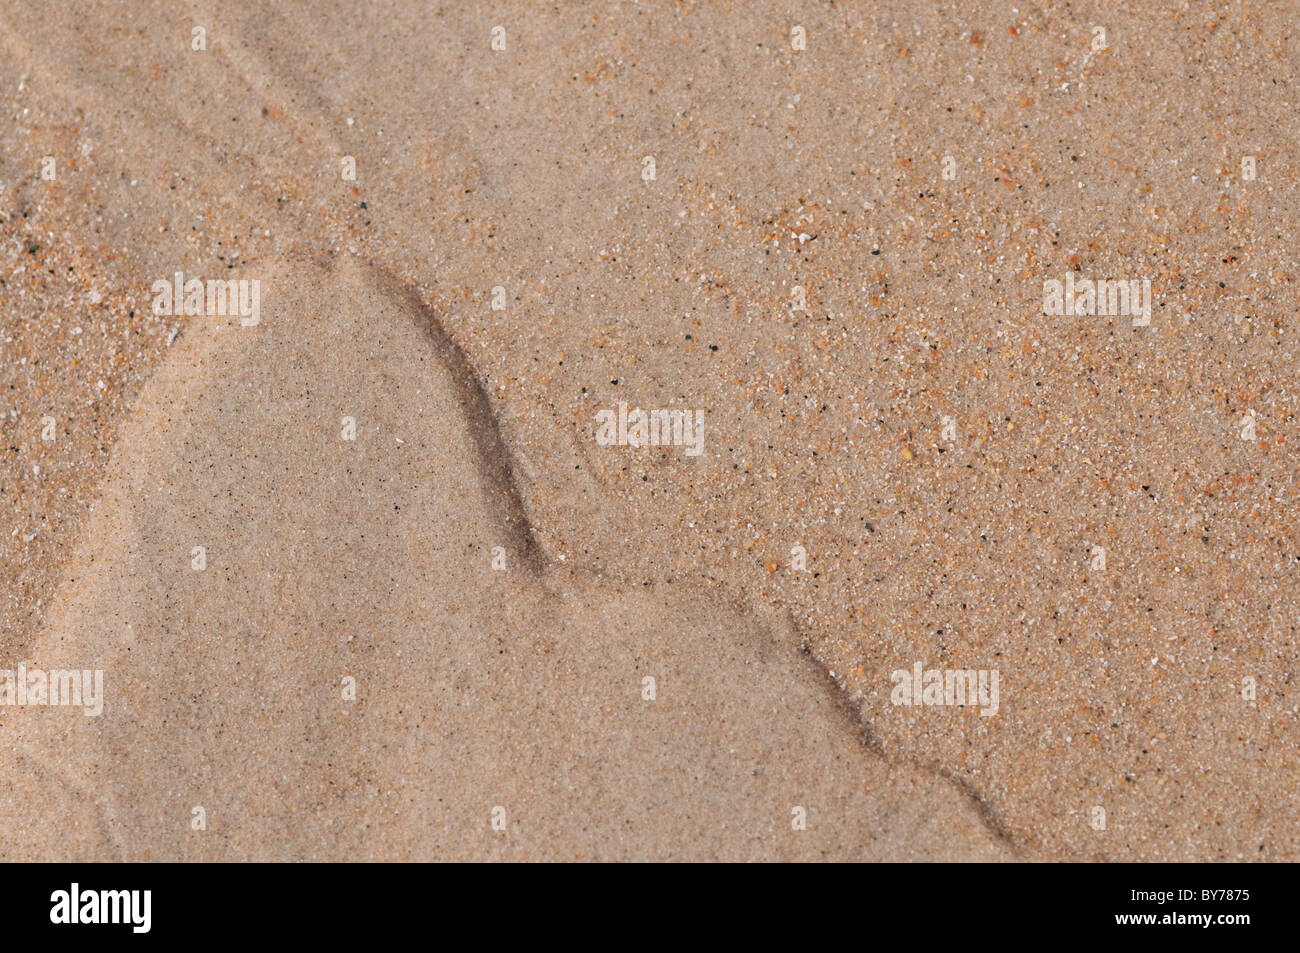 Patterns made in the sand by the receeding tide Stock Photo